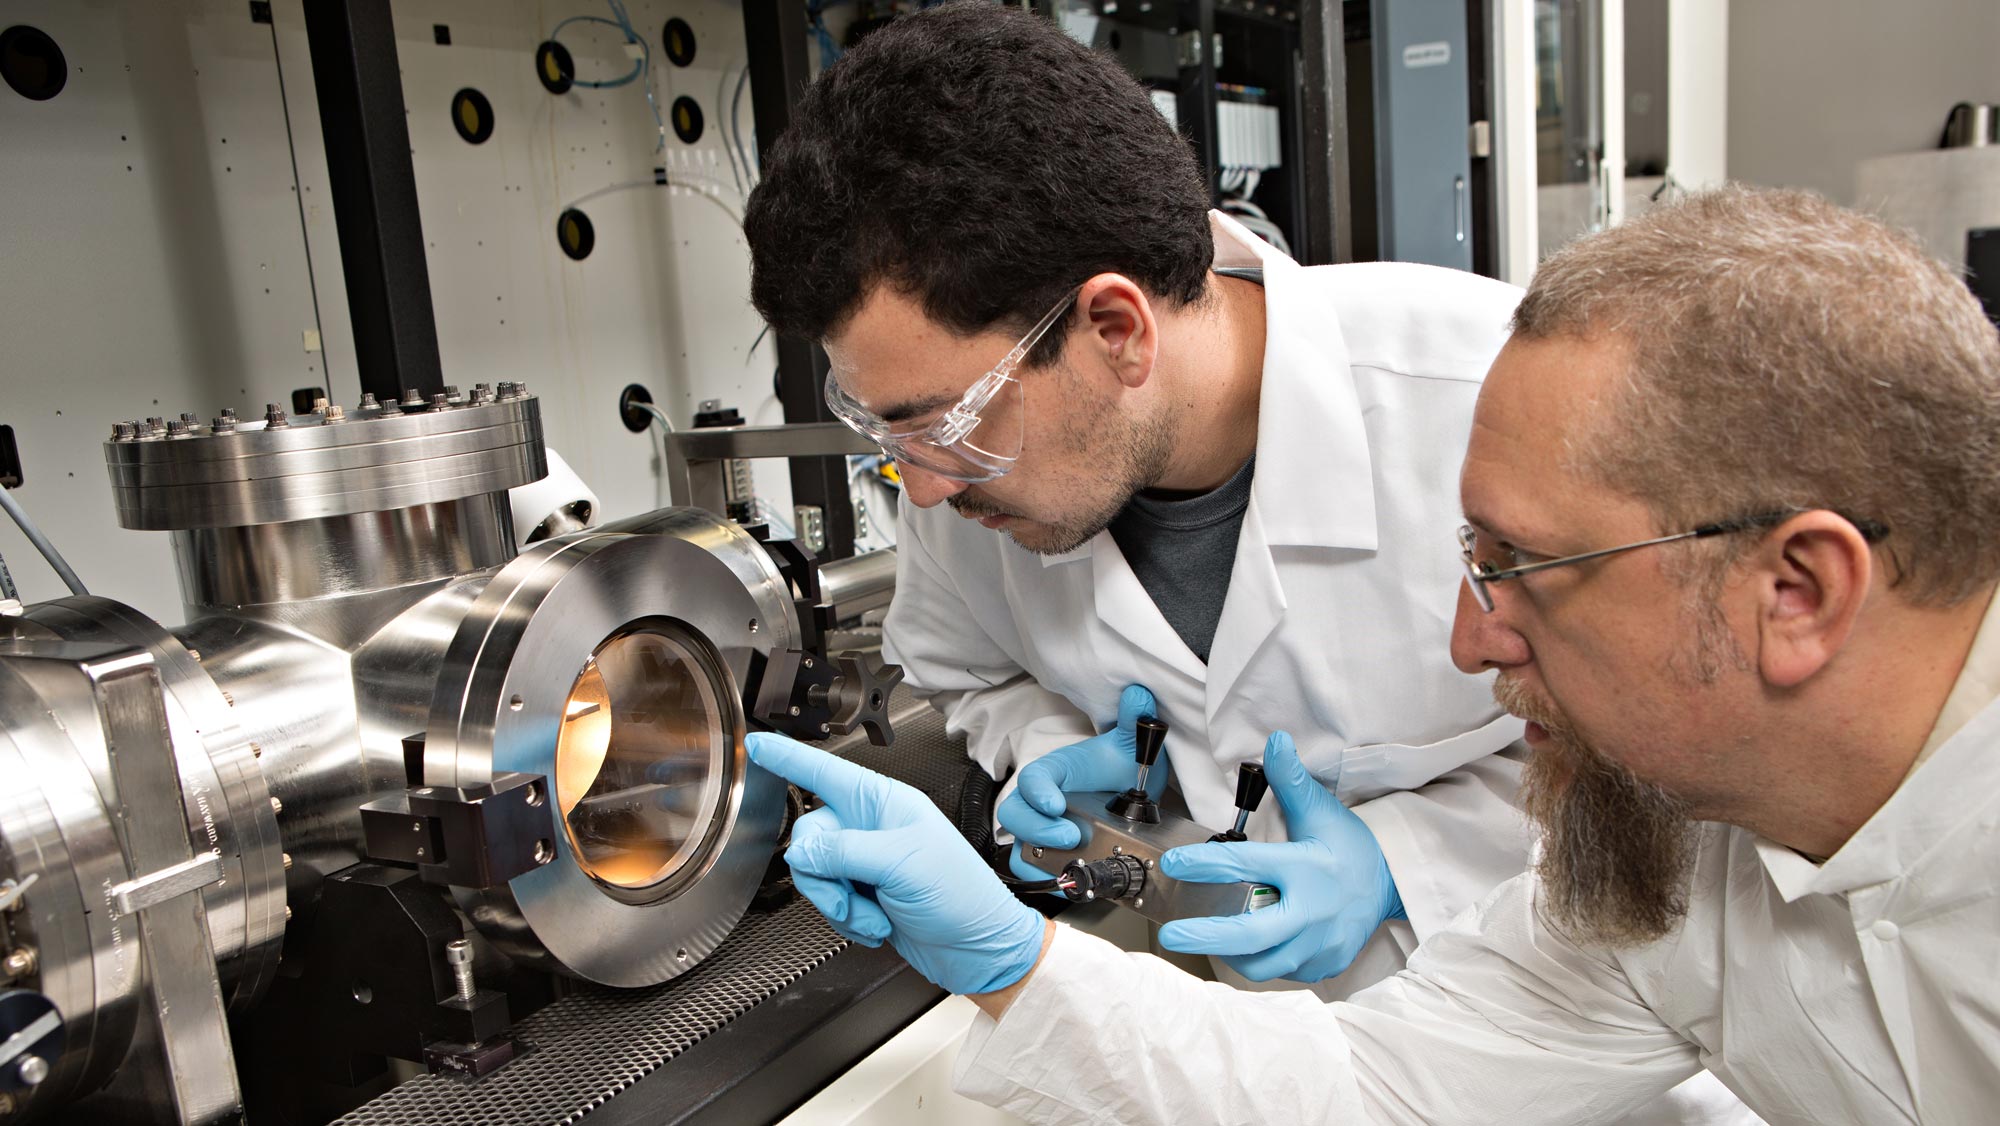 A male researcher with dark hair and goggles and an older male researcher with graying hair and a long beard and glasses observe equipment in a lab.